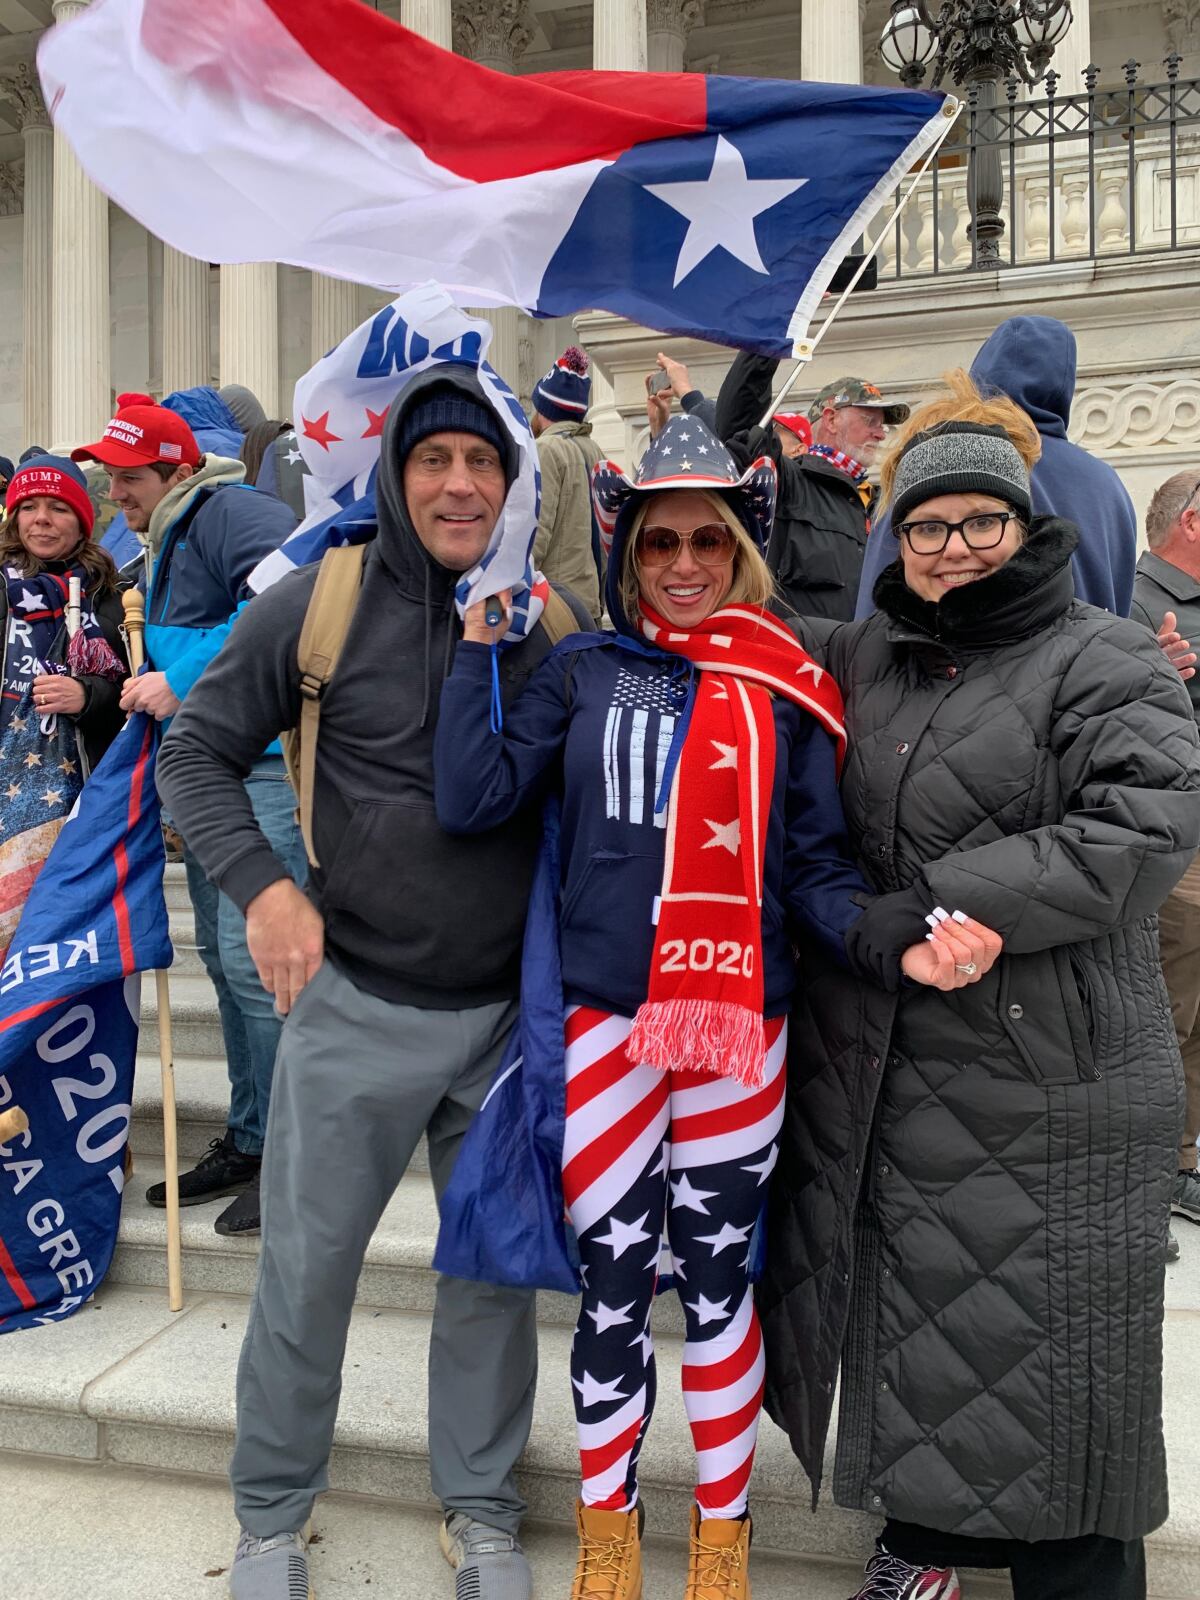 Diane Andrews, her husband and her friend at the U.S. Capitol on Jan. 6